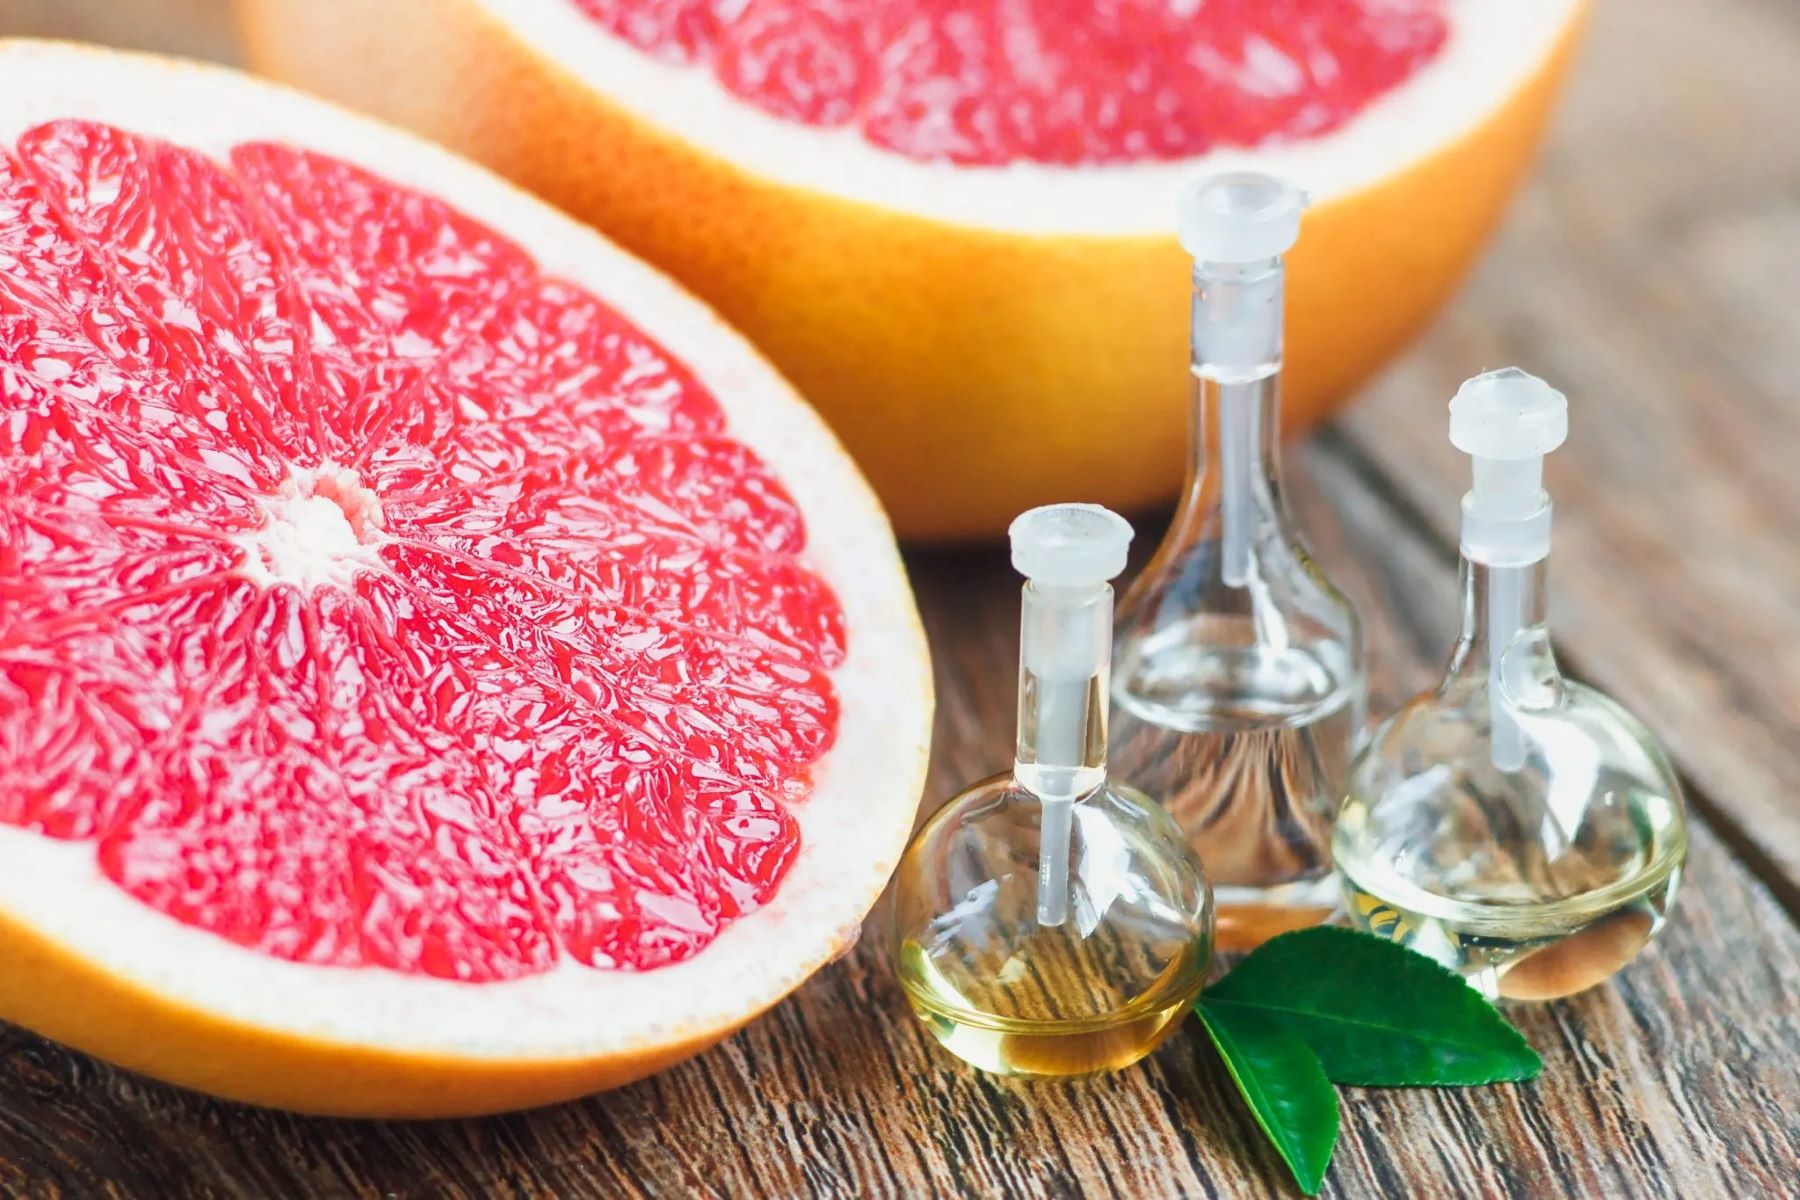 What To Mix With Grapefruit Essential Oil For Room Deodorizer